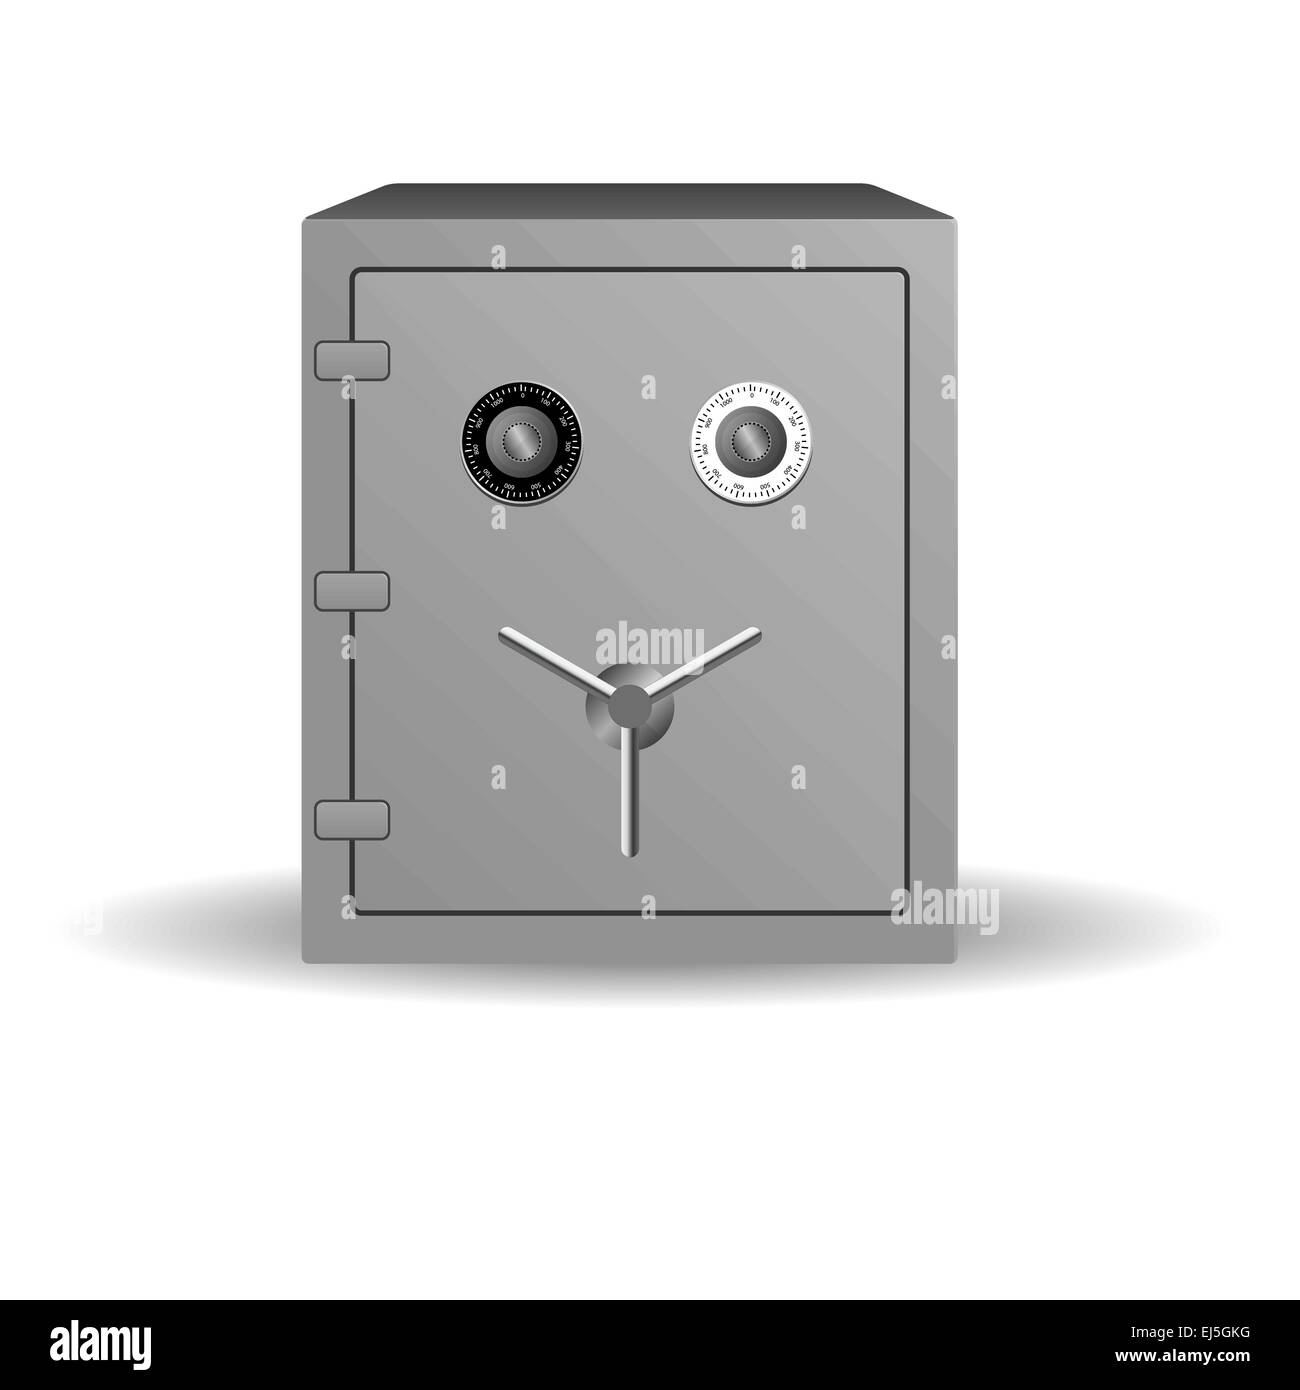 Double lock safe icon isolated on white background, vector illustration Stock Vector